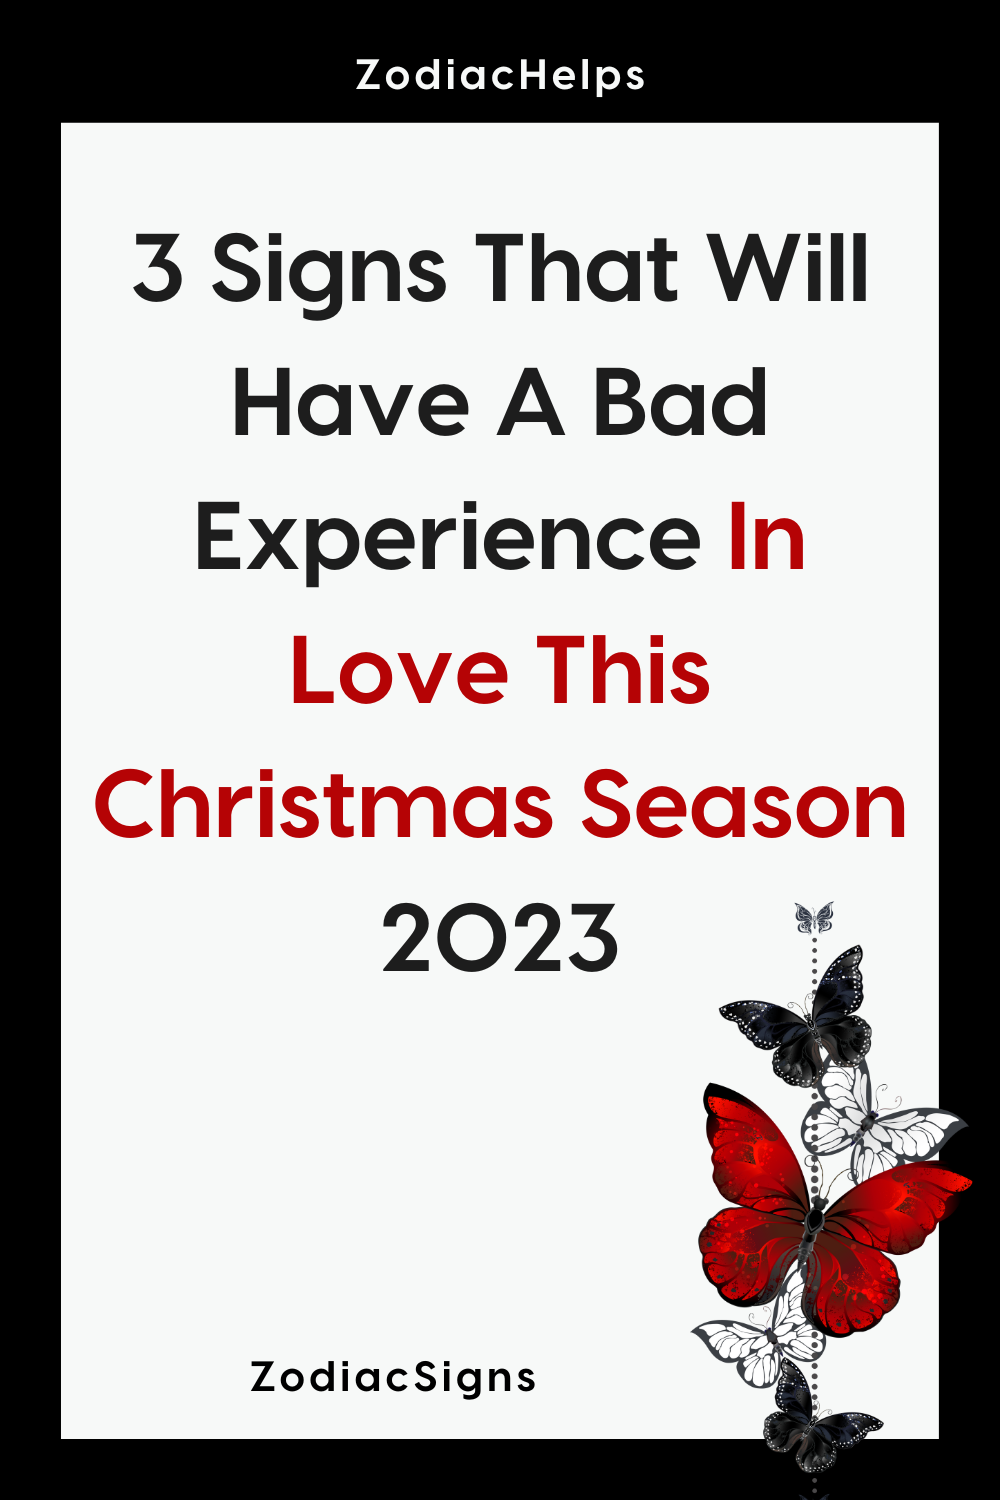 3 Signs That Will Have A Bad Experience In Love This Christmas Season 2023